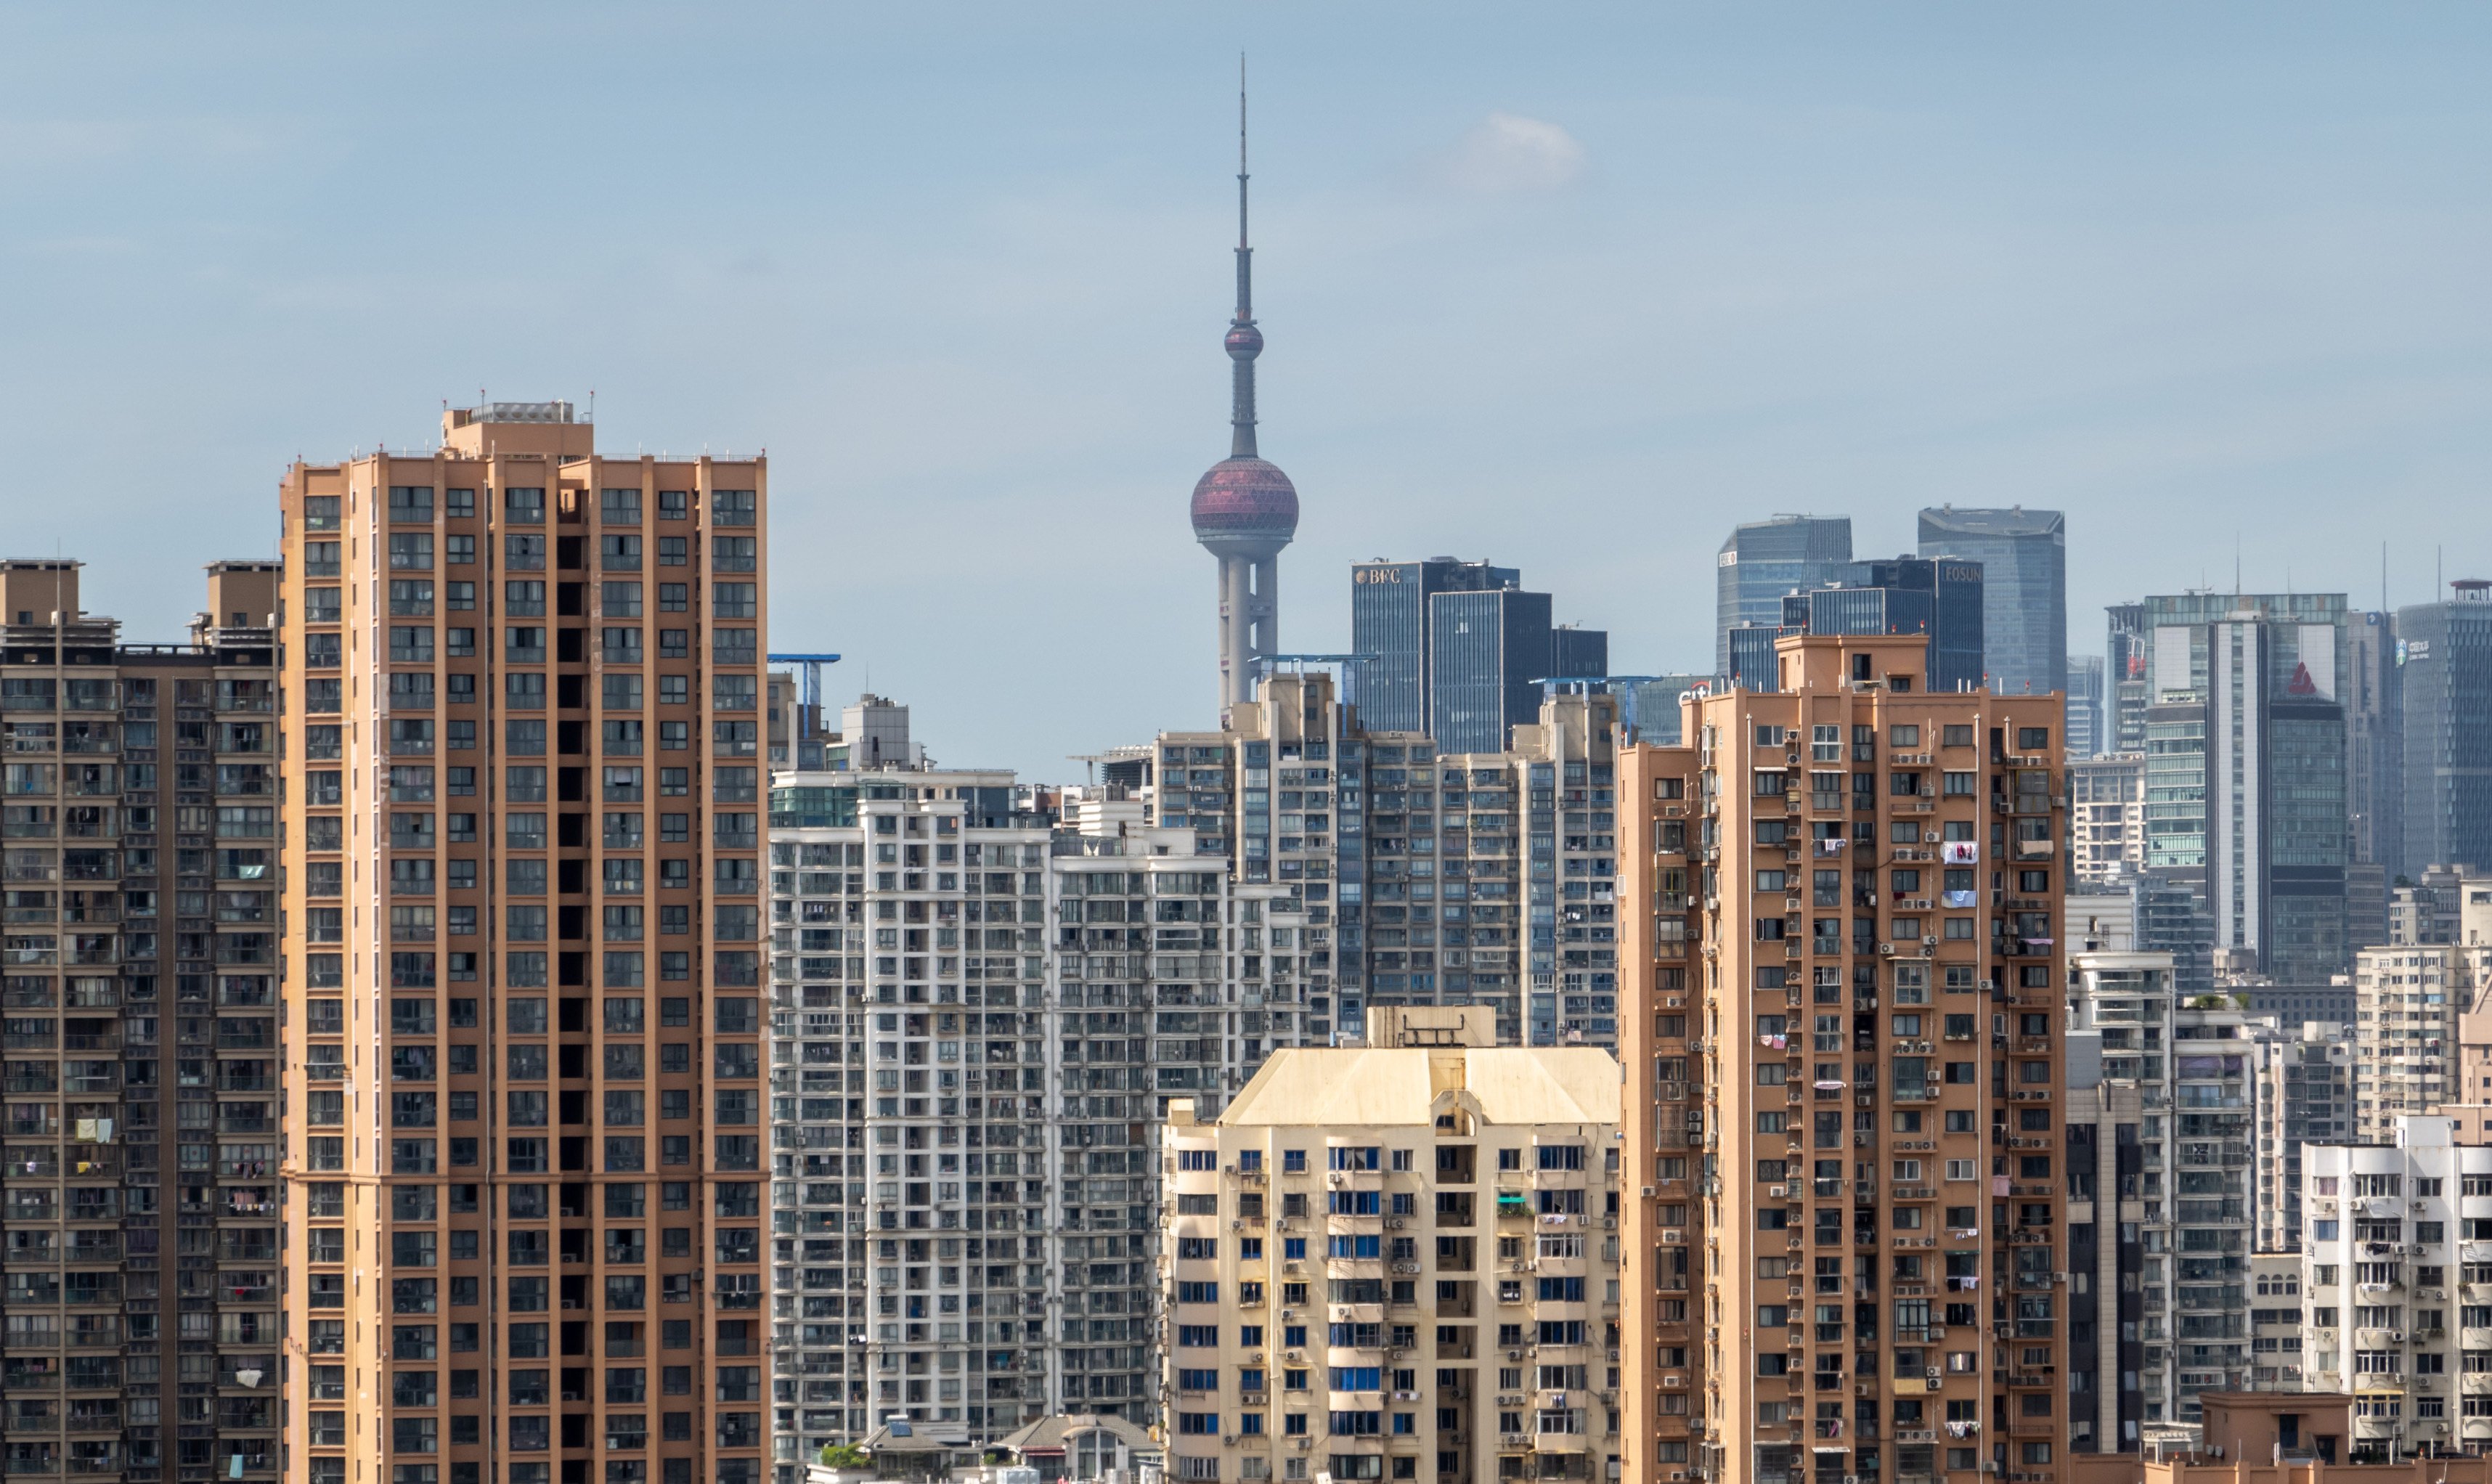 Residential buildings in Shanghai. Photo: Getty Images